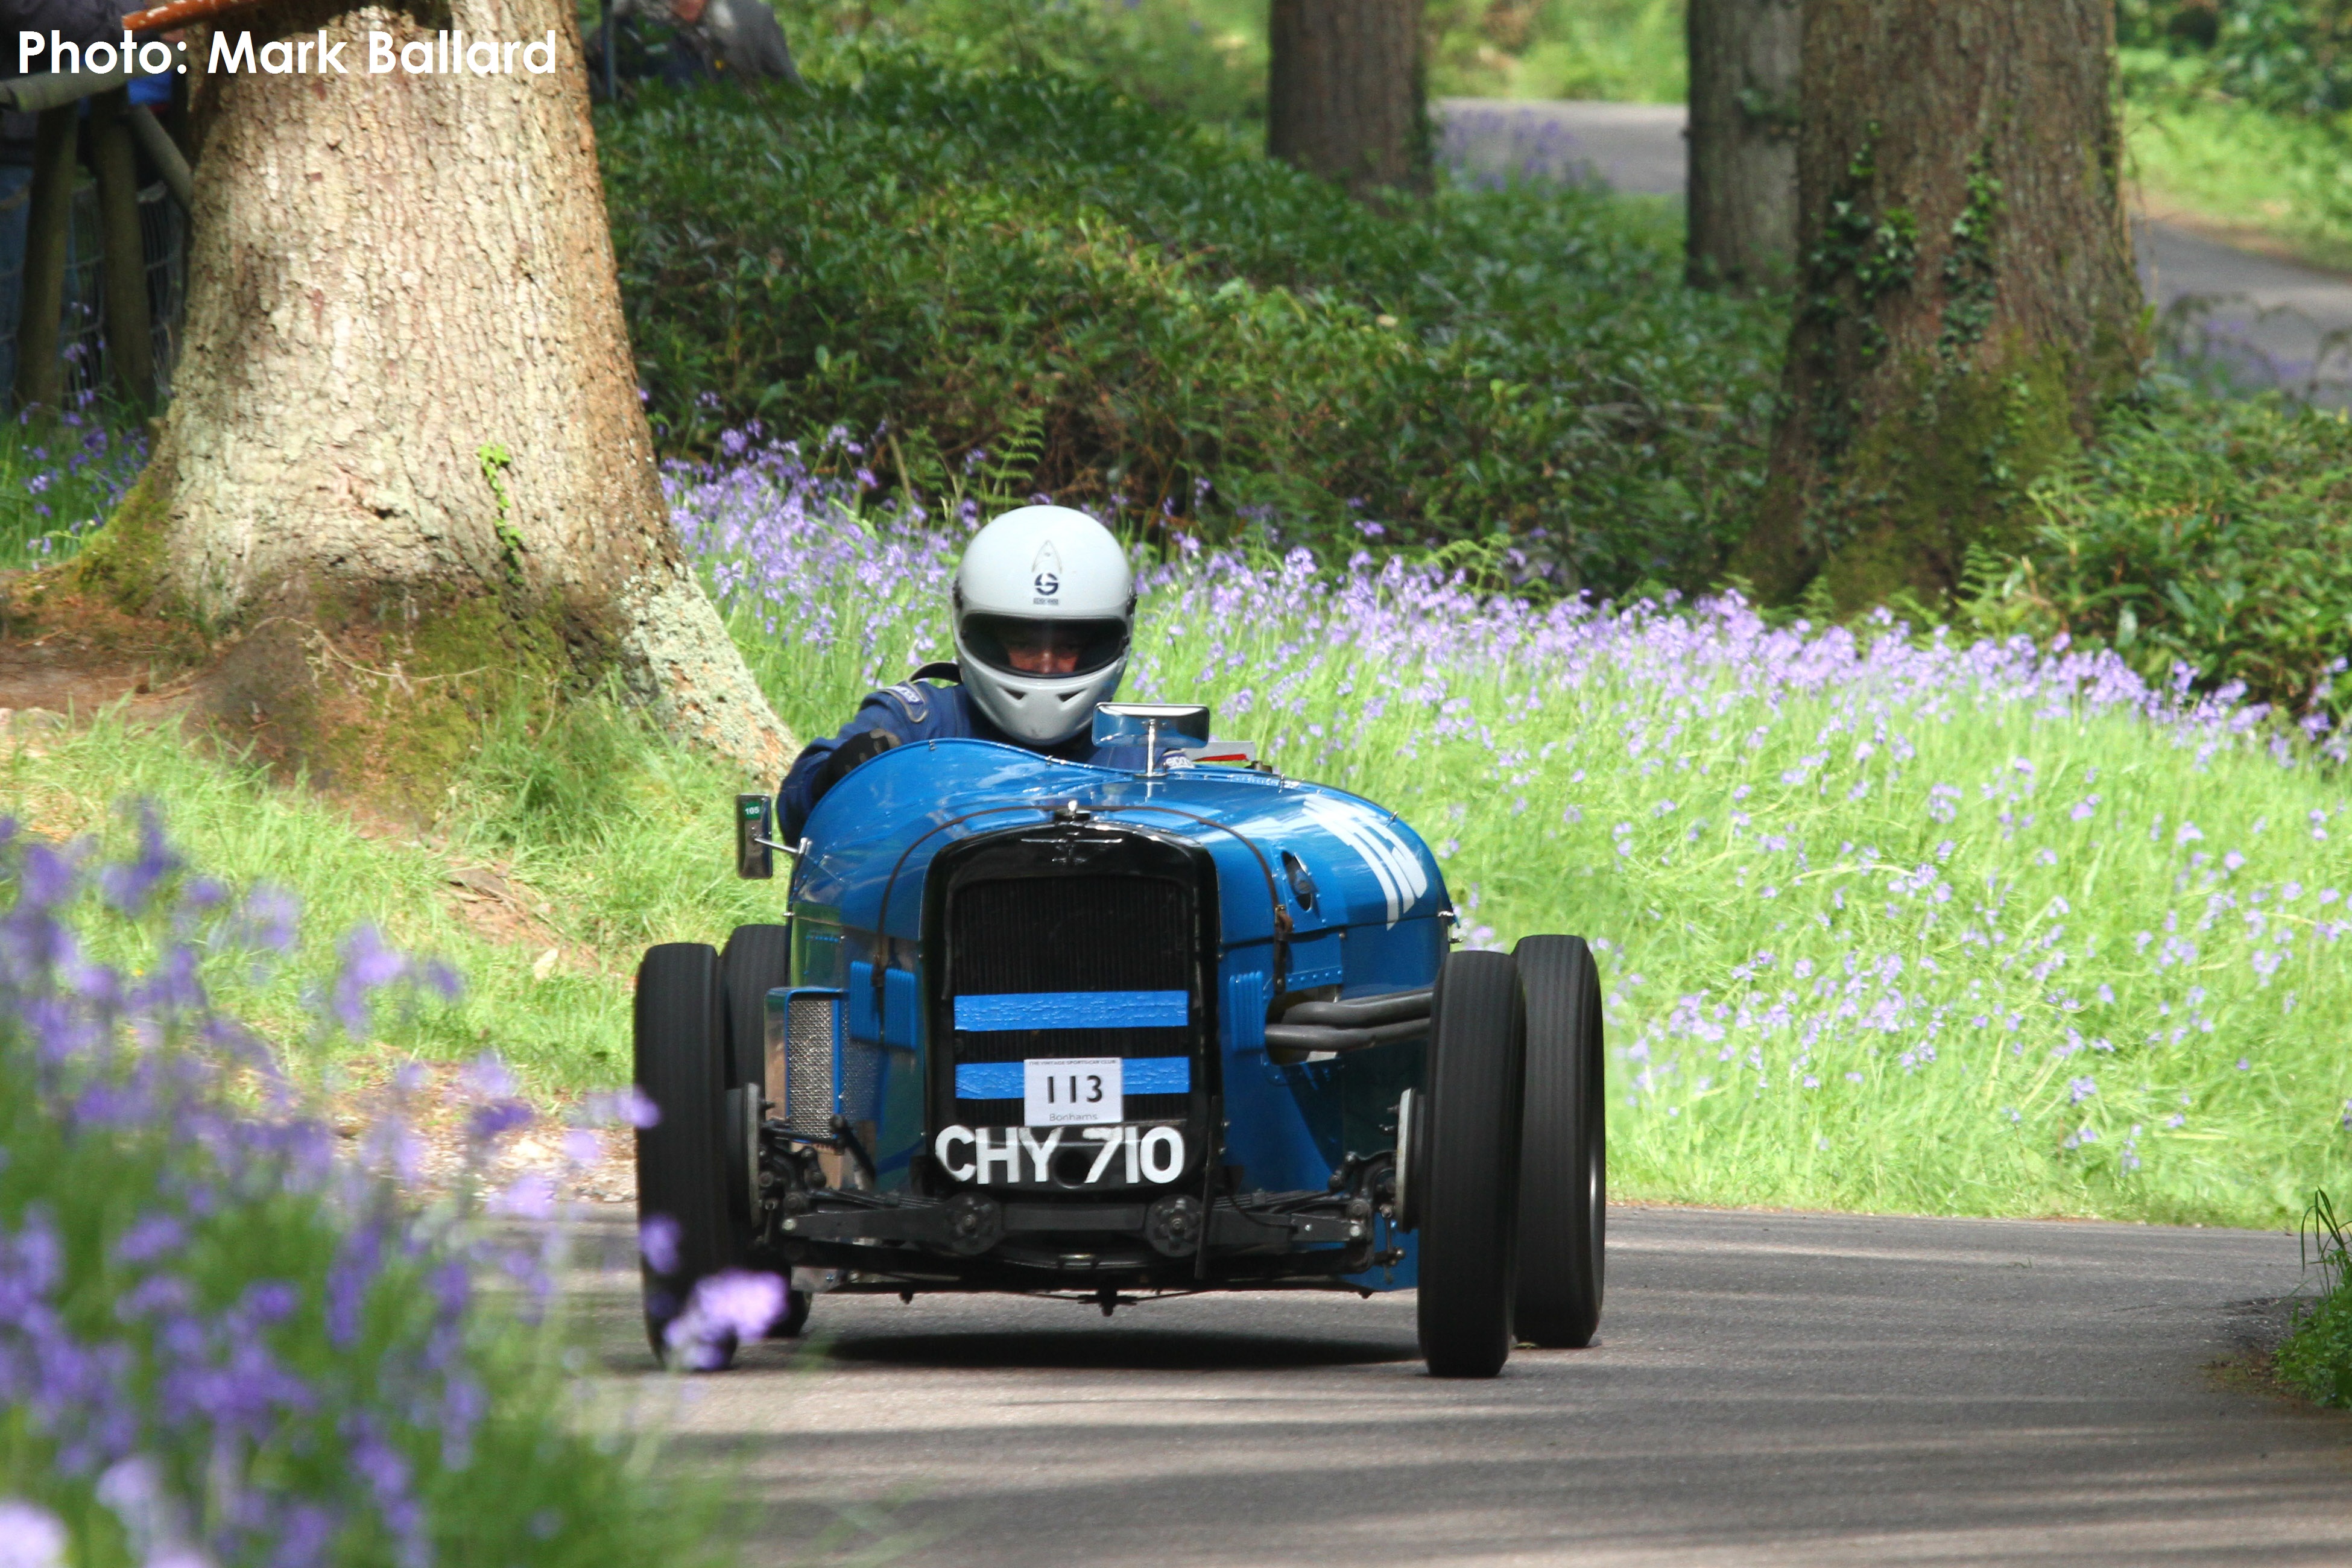 Round 2 of the Speed Championship returns to Wiscombe Park cover